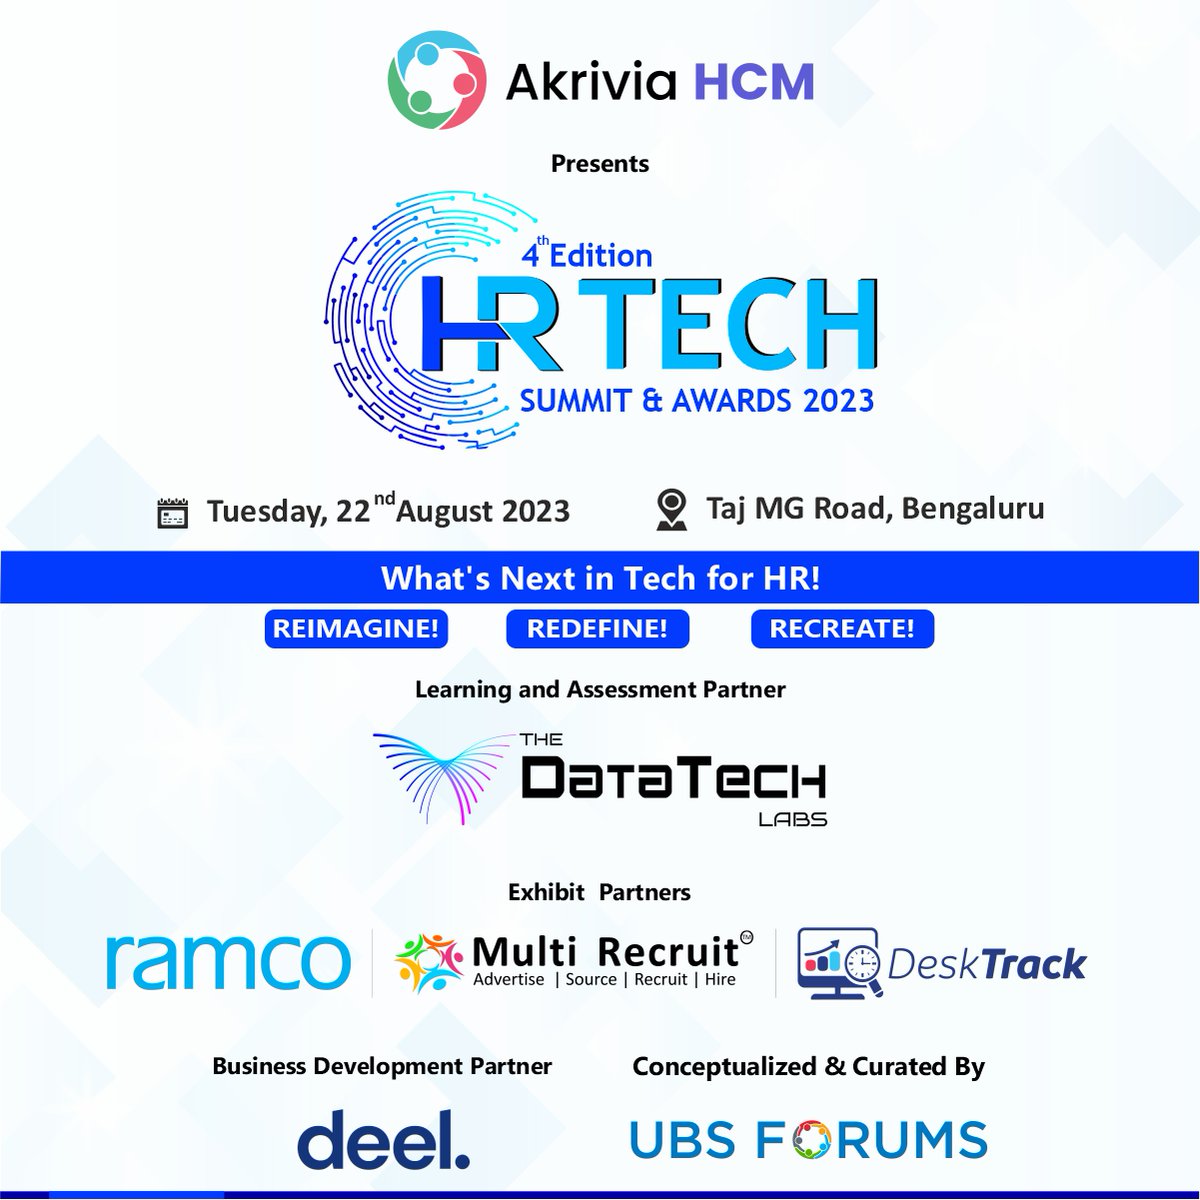 ⚡️2 Weeks to go, Embrace the energy of collaboration with our Partners for our Exclusive Event on  '4th Edition HR Tech Summit & Awards 2023' on 22nd August 2023 at Taj MG Road, Bengaluru. 
@MultiRecruit. 
Register At- tinyurl.com/5n8w72rn 
#UBSFHRTech